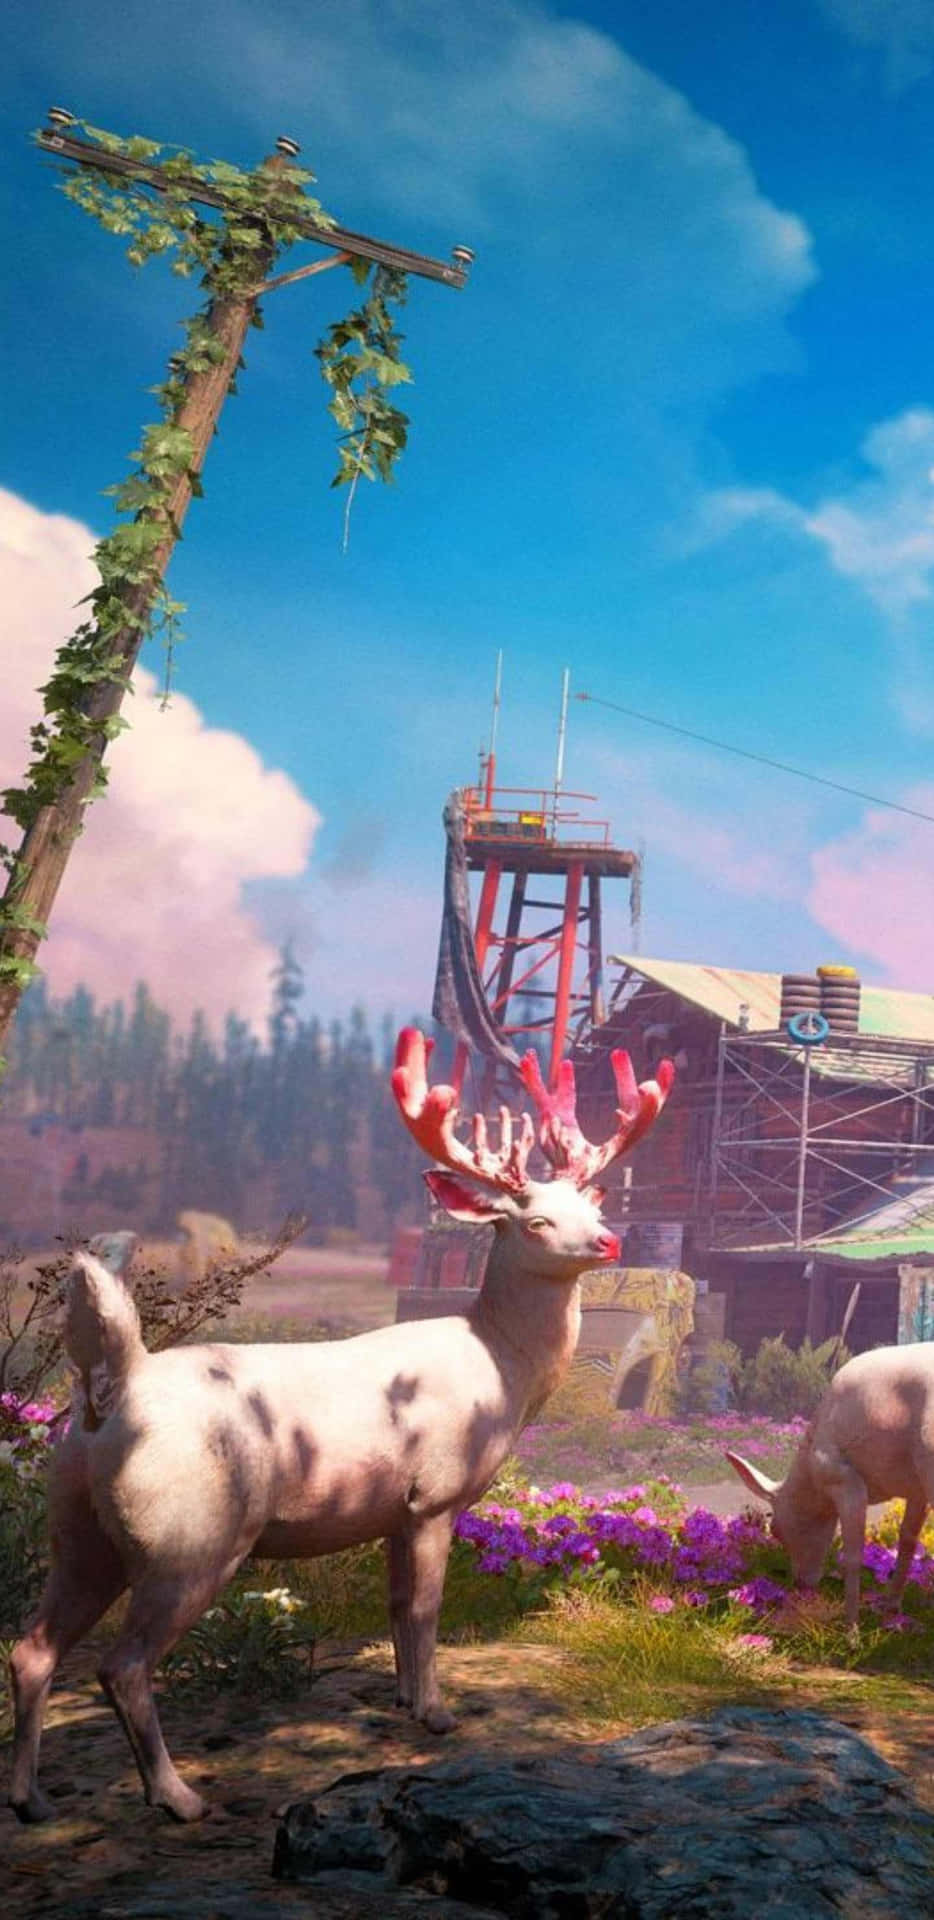 Play Far Cry New Dawn on your android device